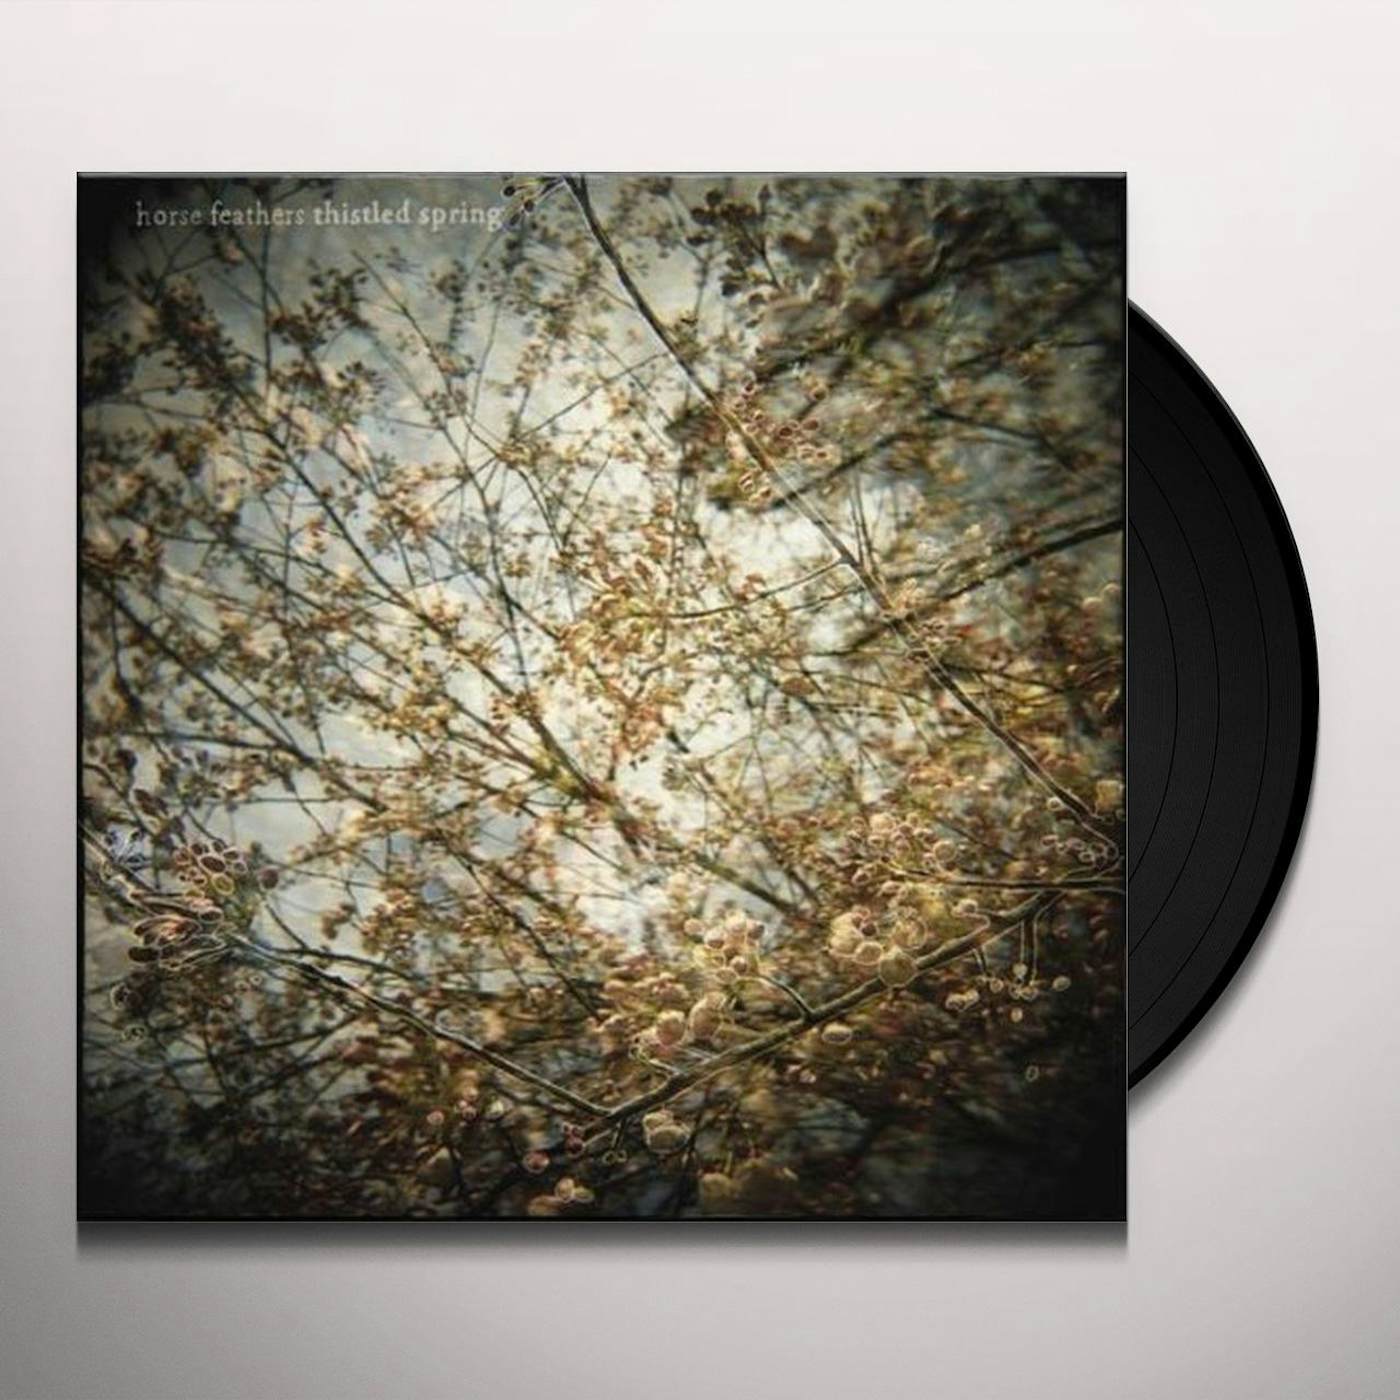 Horse Feathers Thistled Spring Vinyl Record